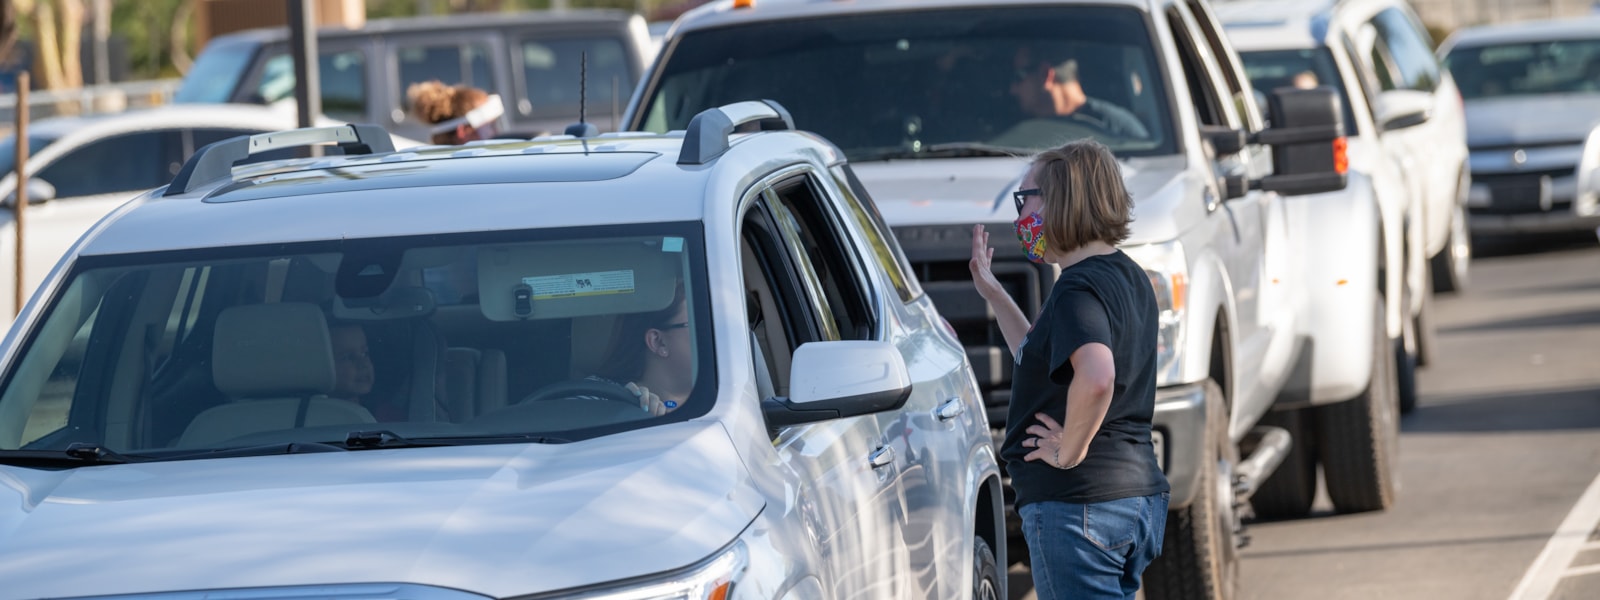 staff member waving while talking to a parent in their vehicle